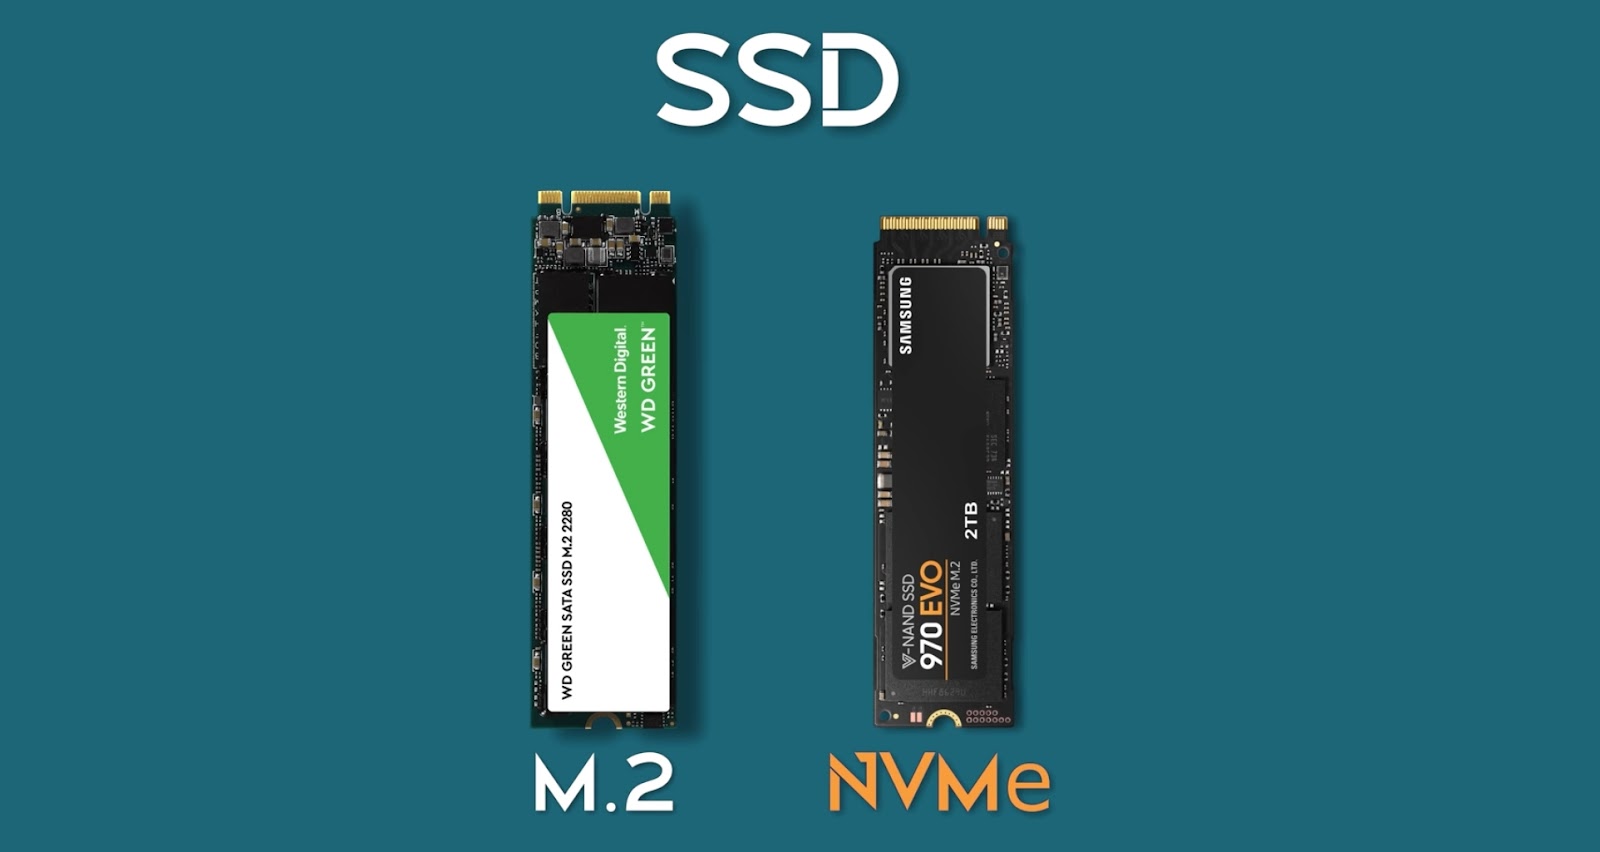 Ssd vs hdd which is best